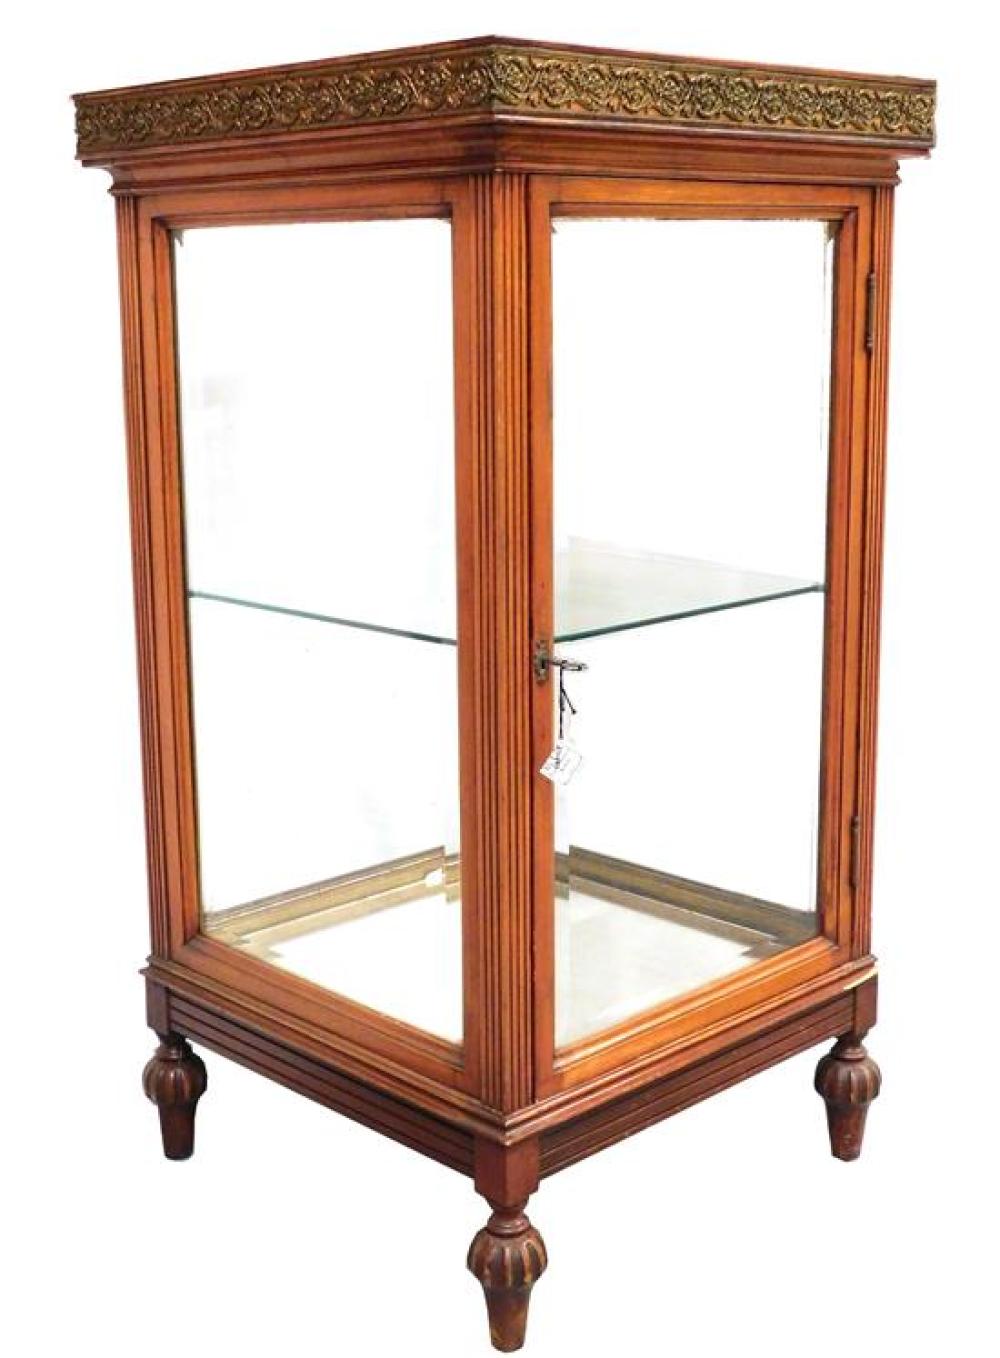 GLASS PANEL DISPLAY CABINET WITH